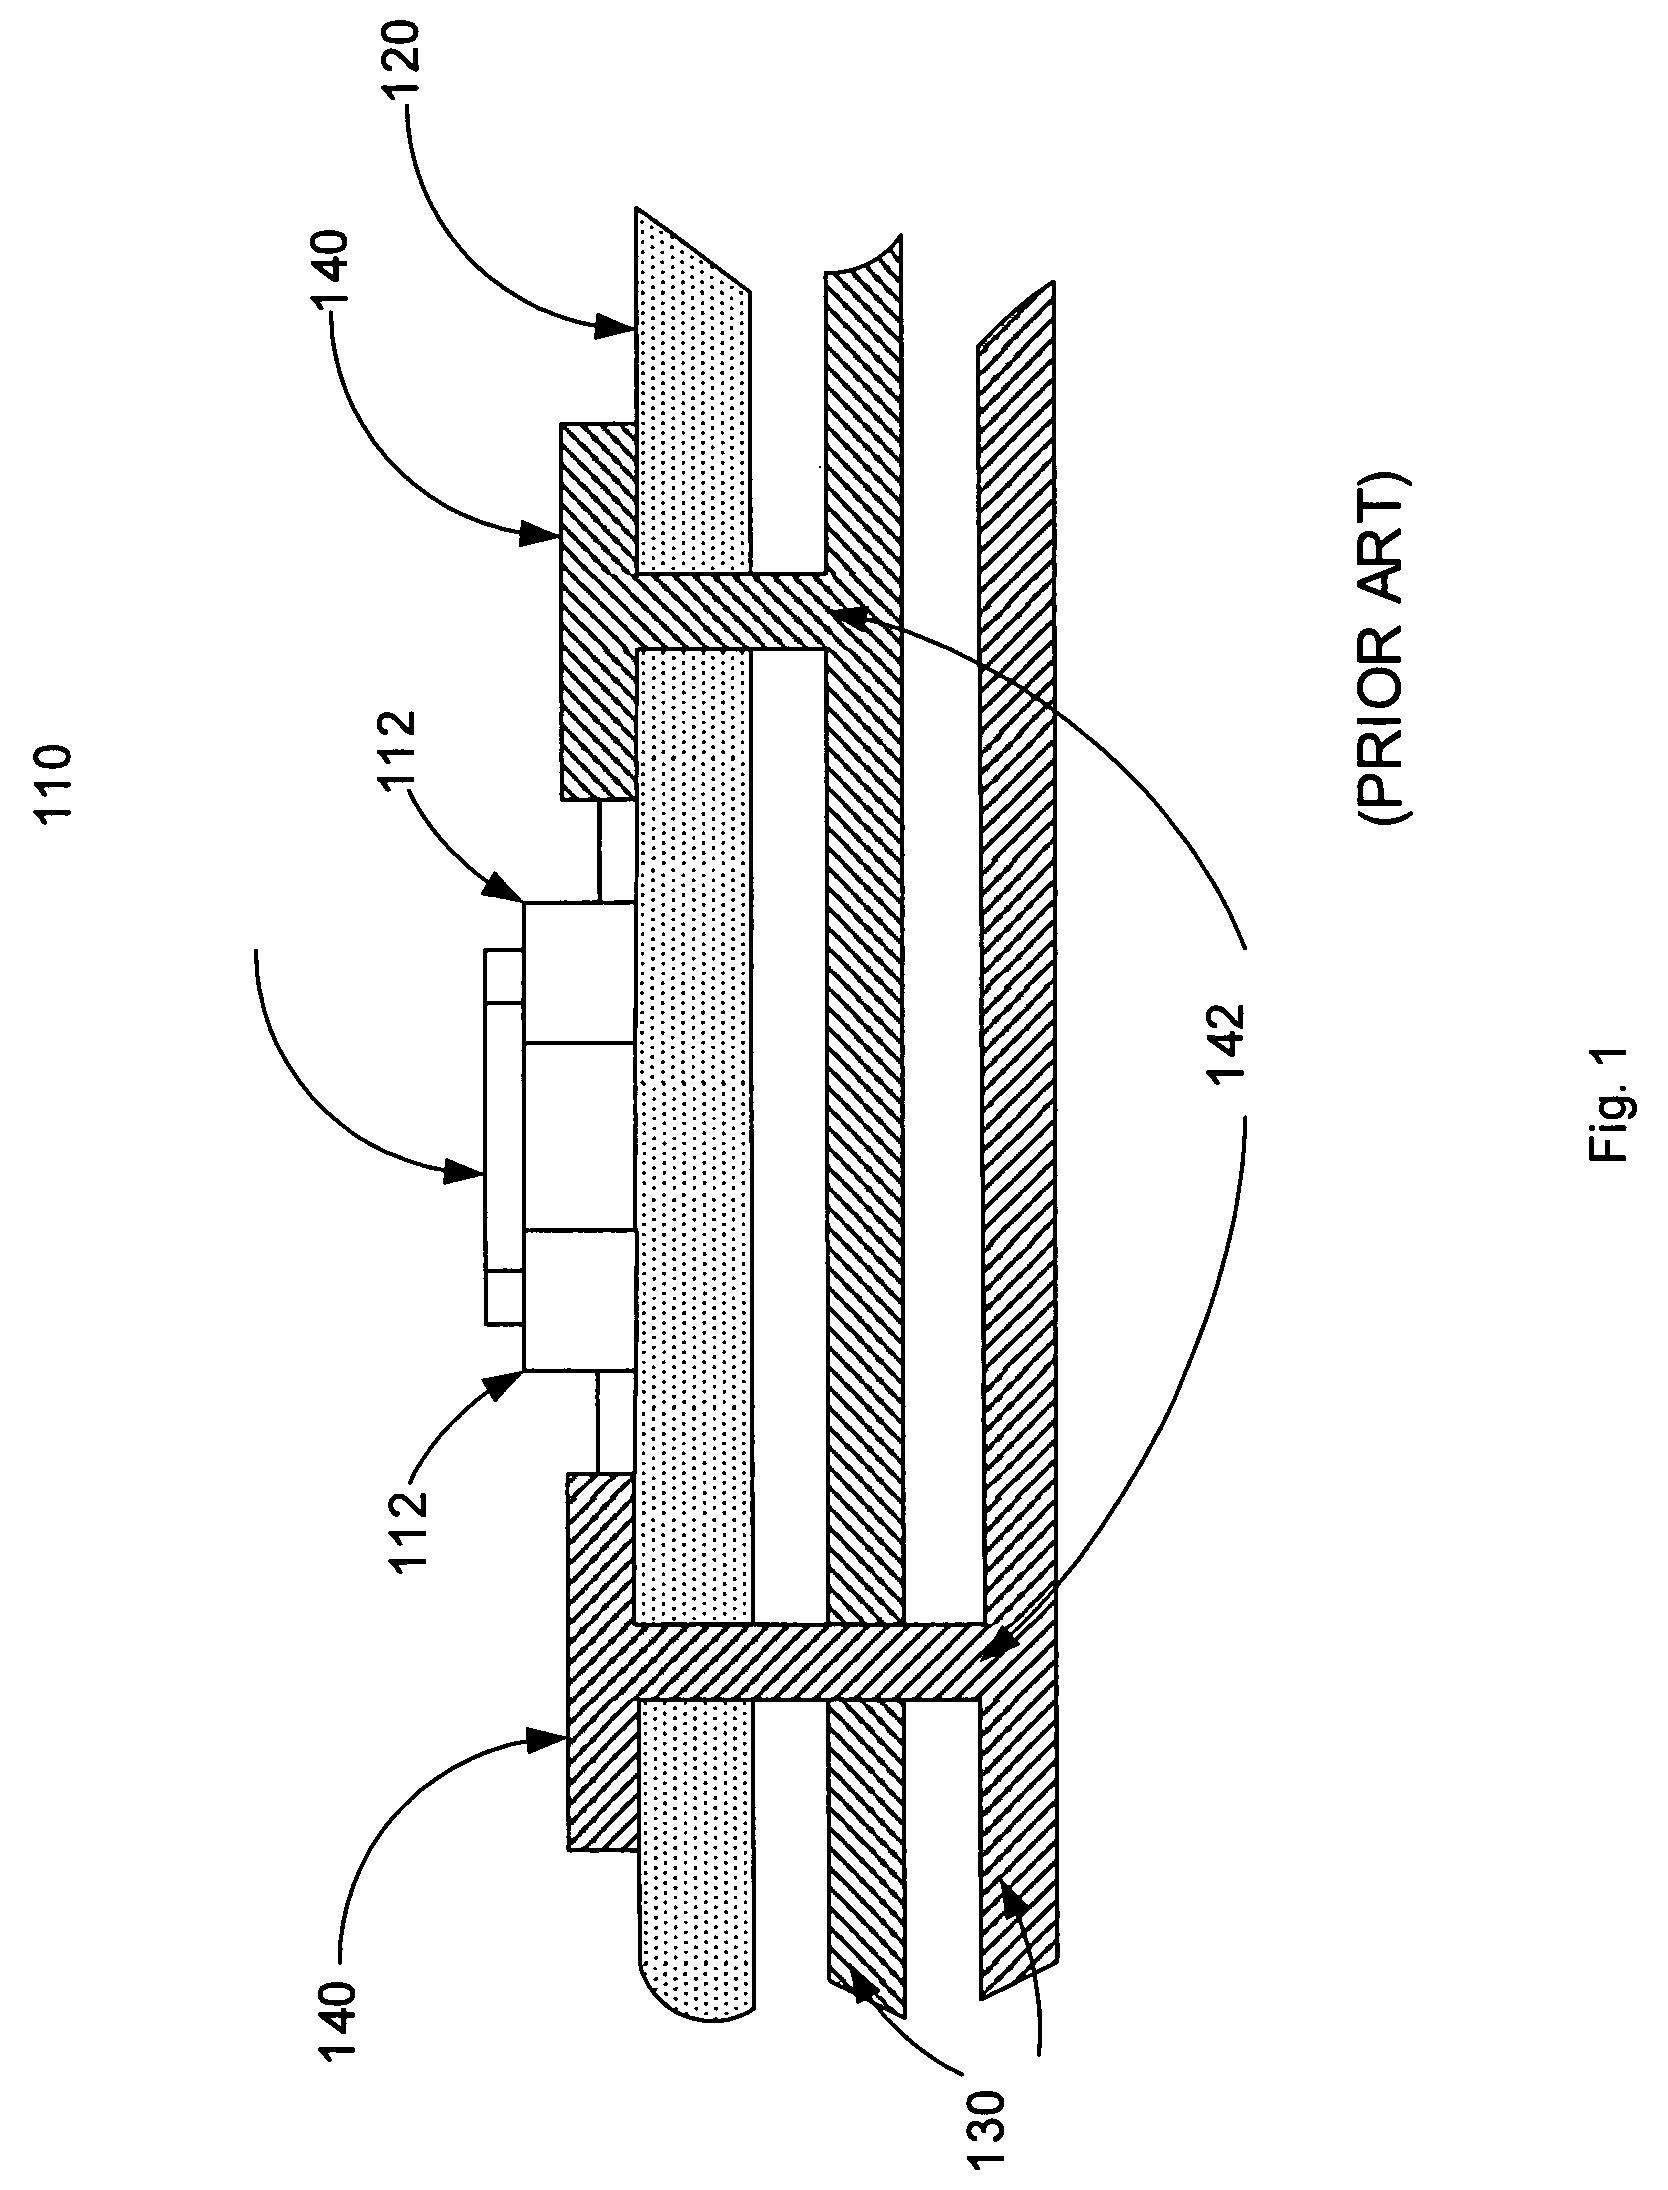 Method and apparatus for providing improved loop inductance of decoupling capacitors